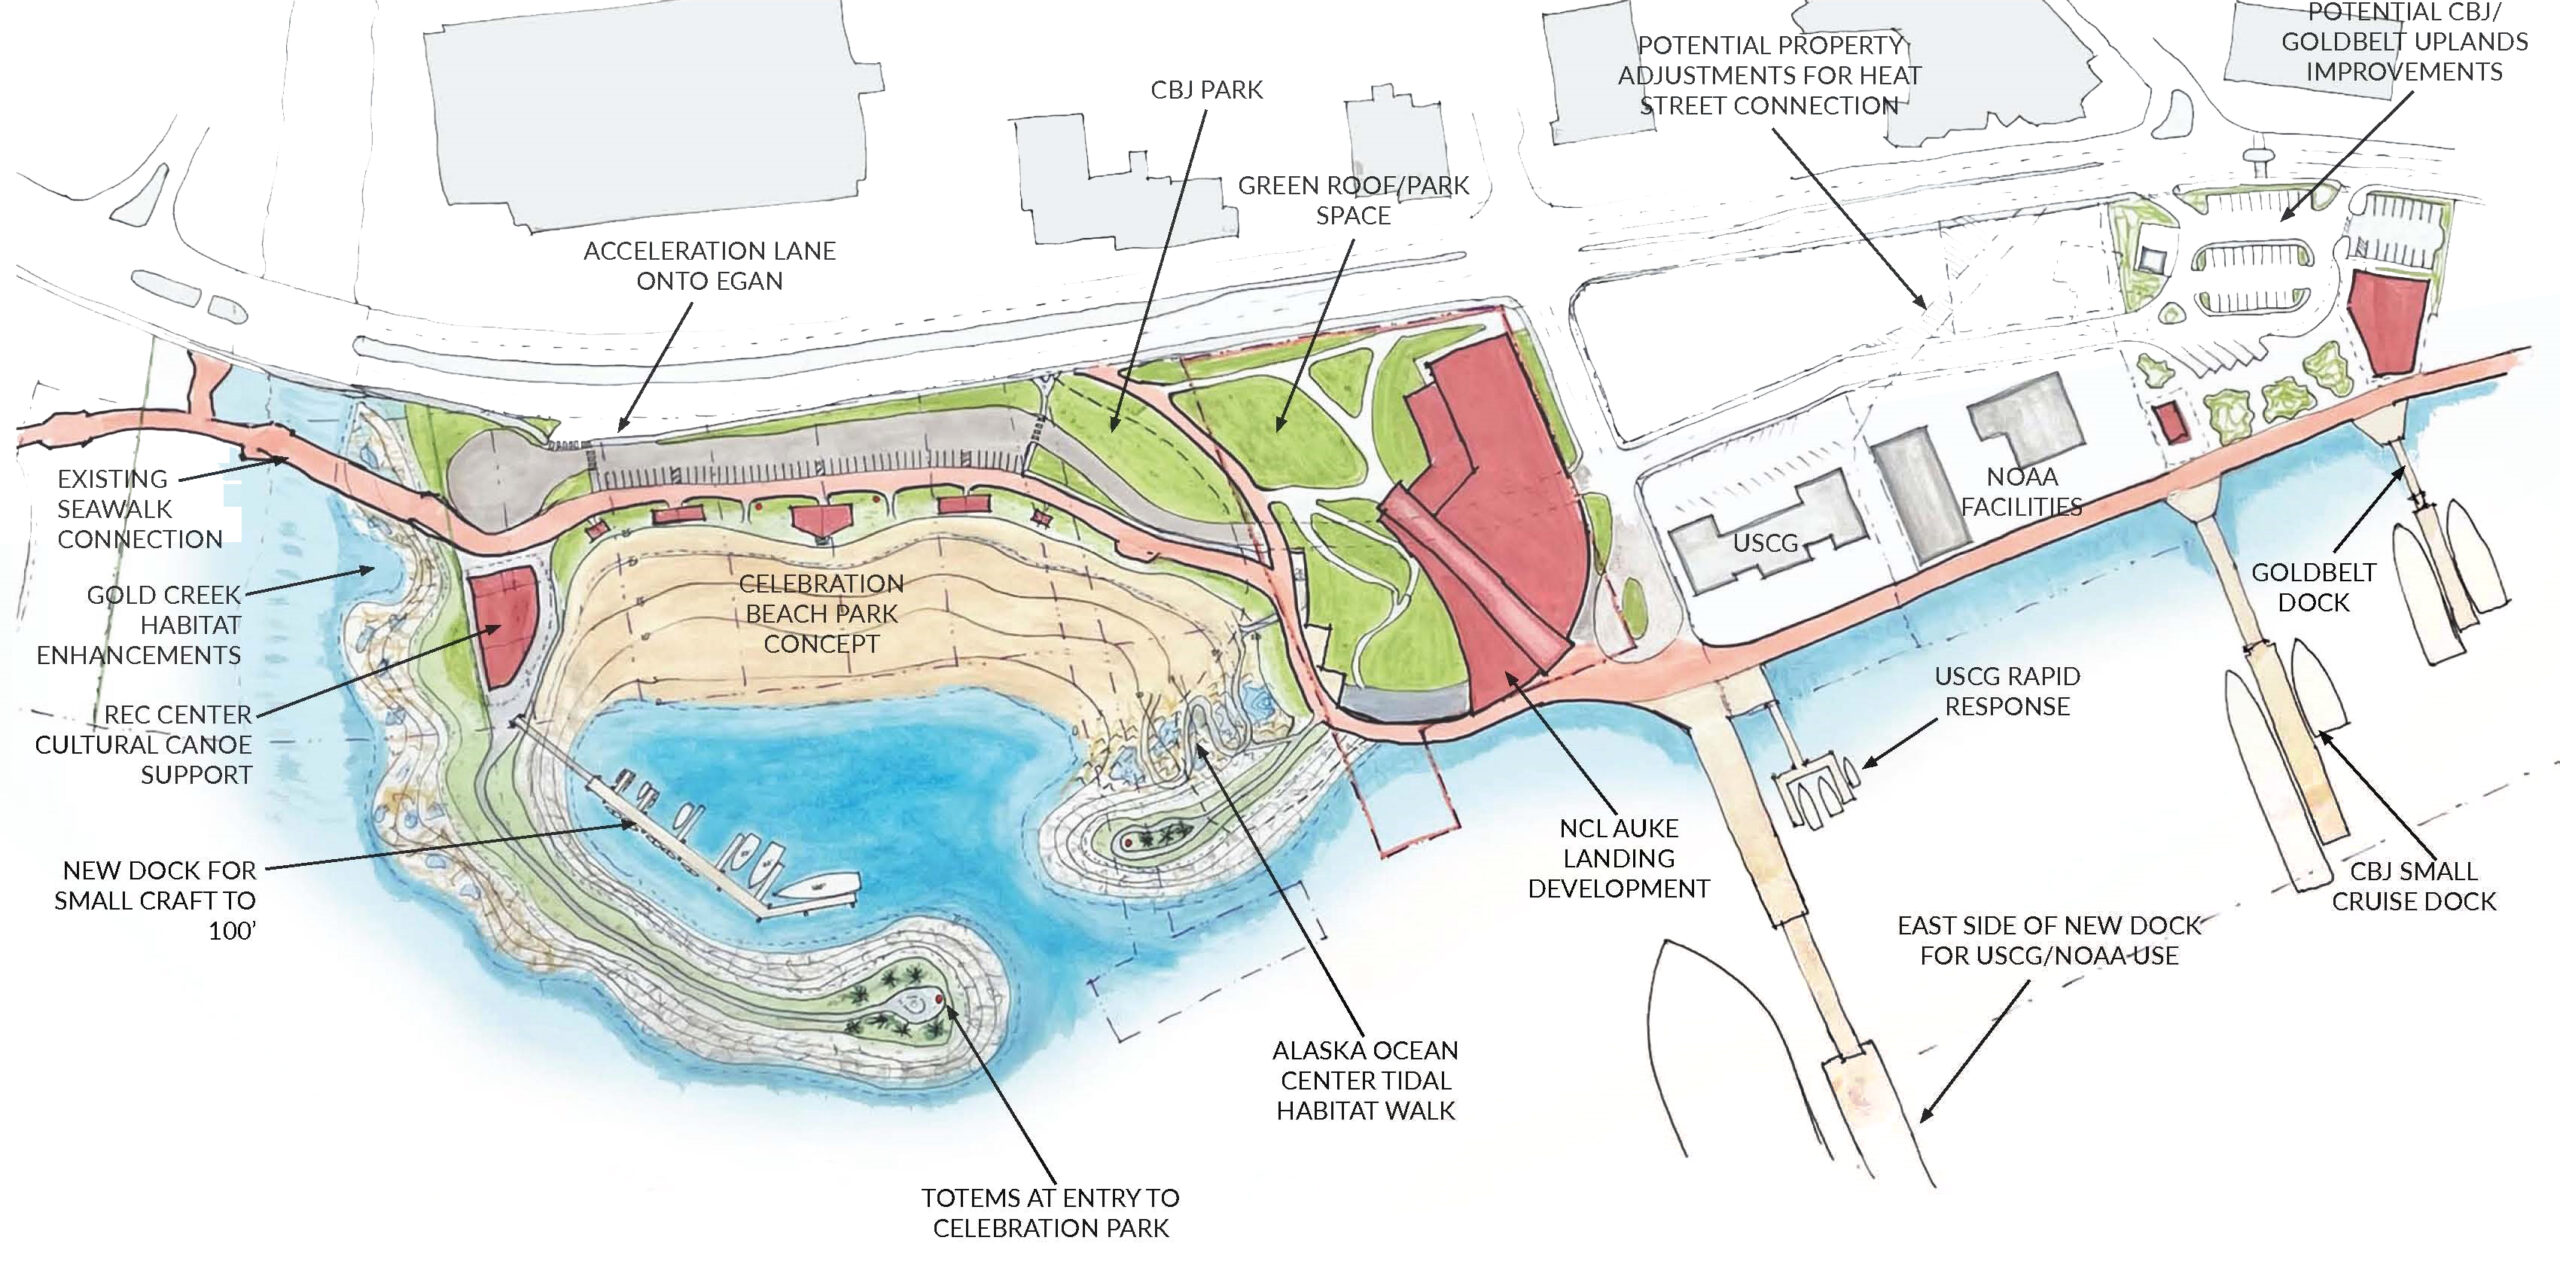 Featured image for “CBJ Waterfront Development”